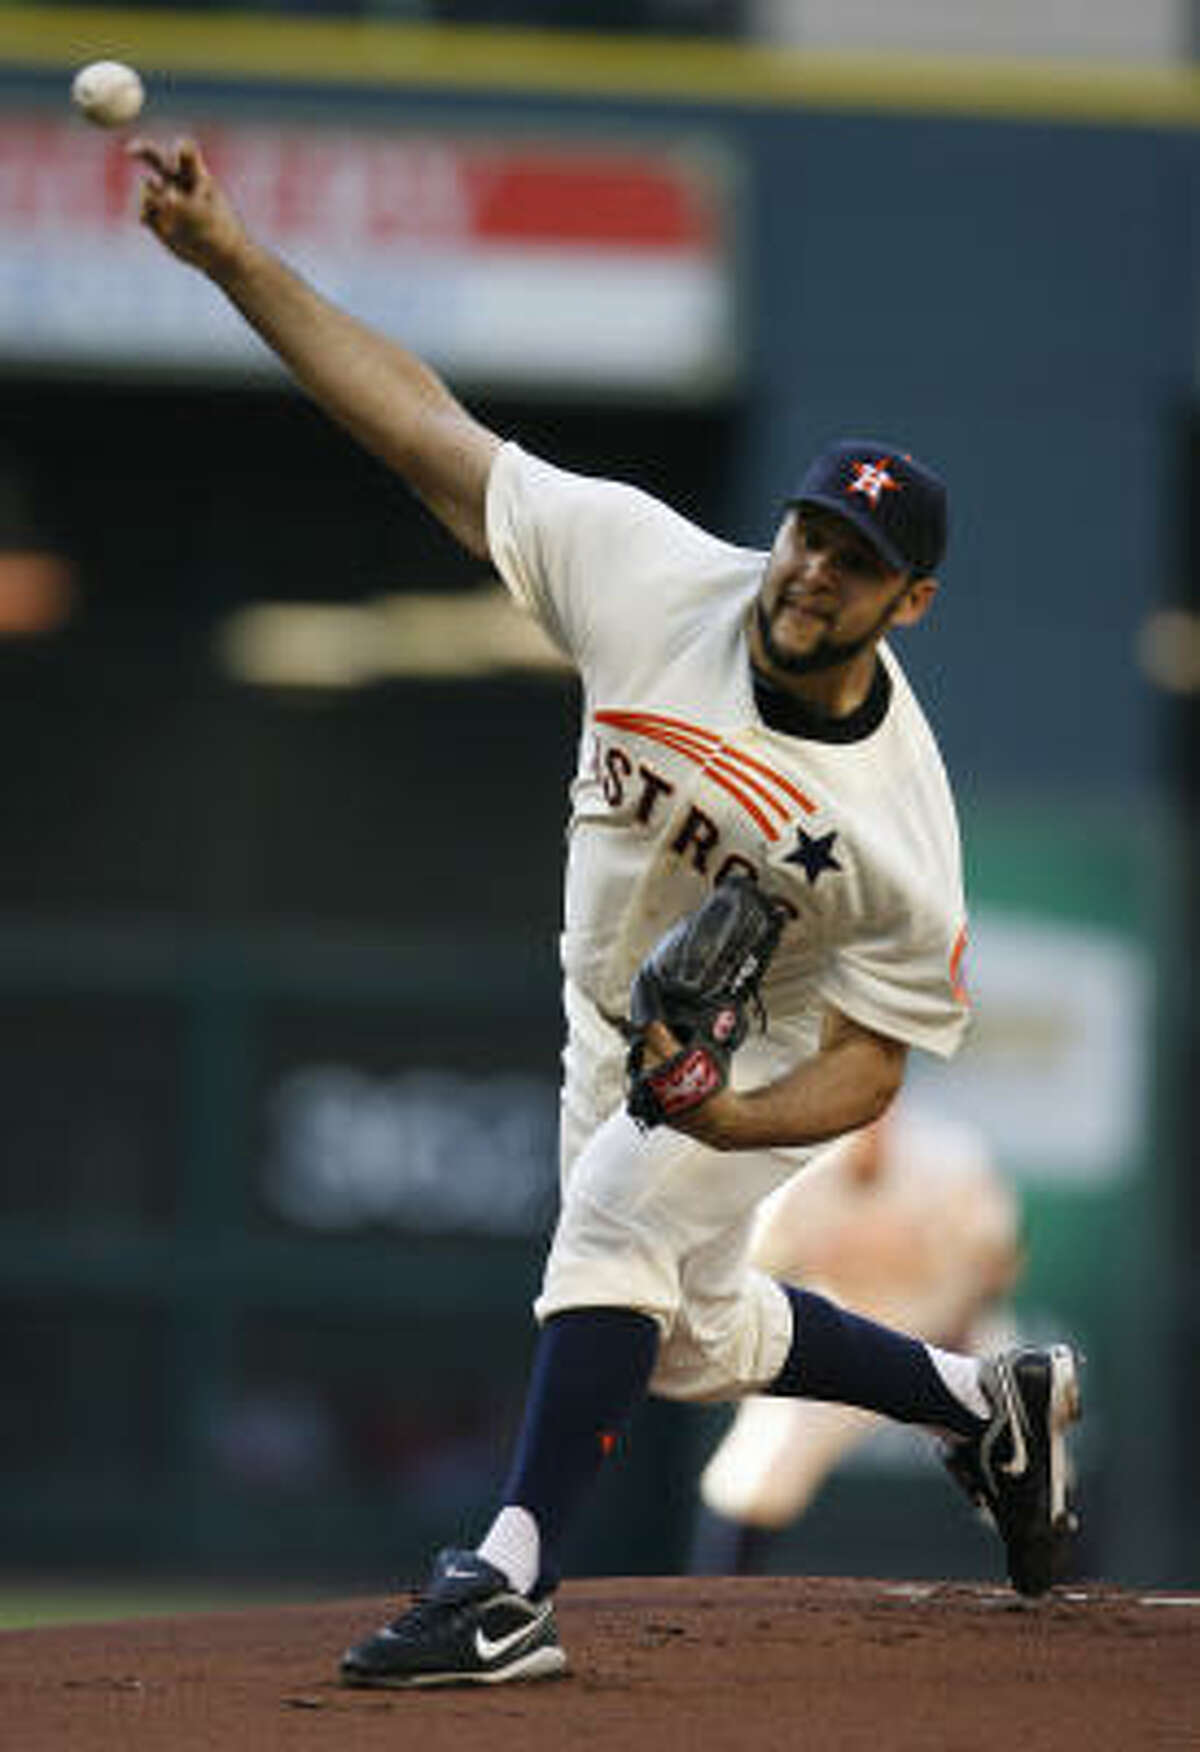 Astros pitcher Felipe Paulino started the second game of the series, matching up against Phillies pitcher Jamie Moyer.